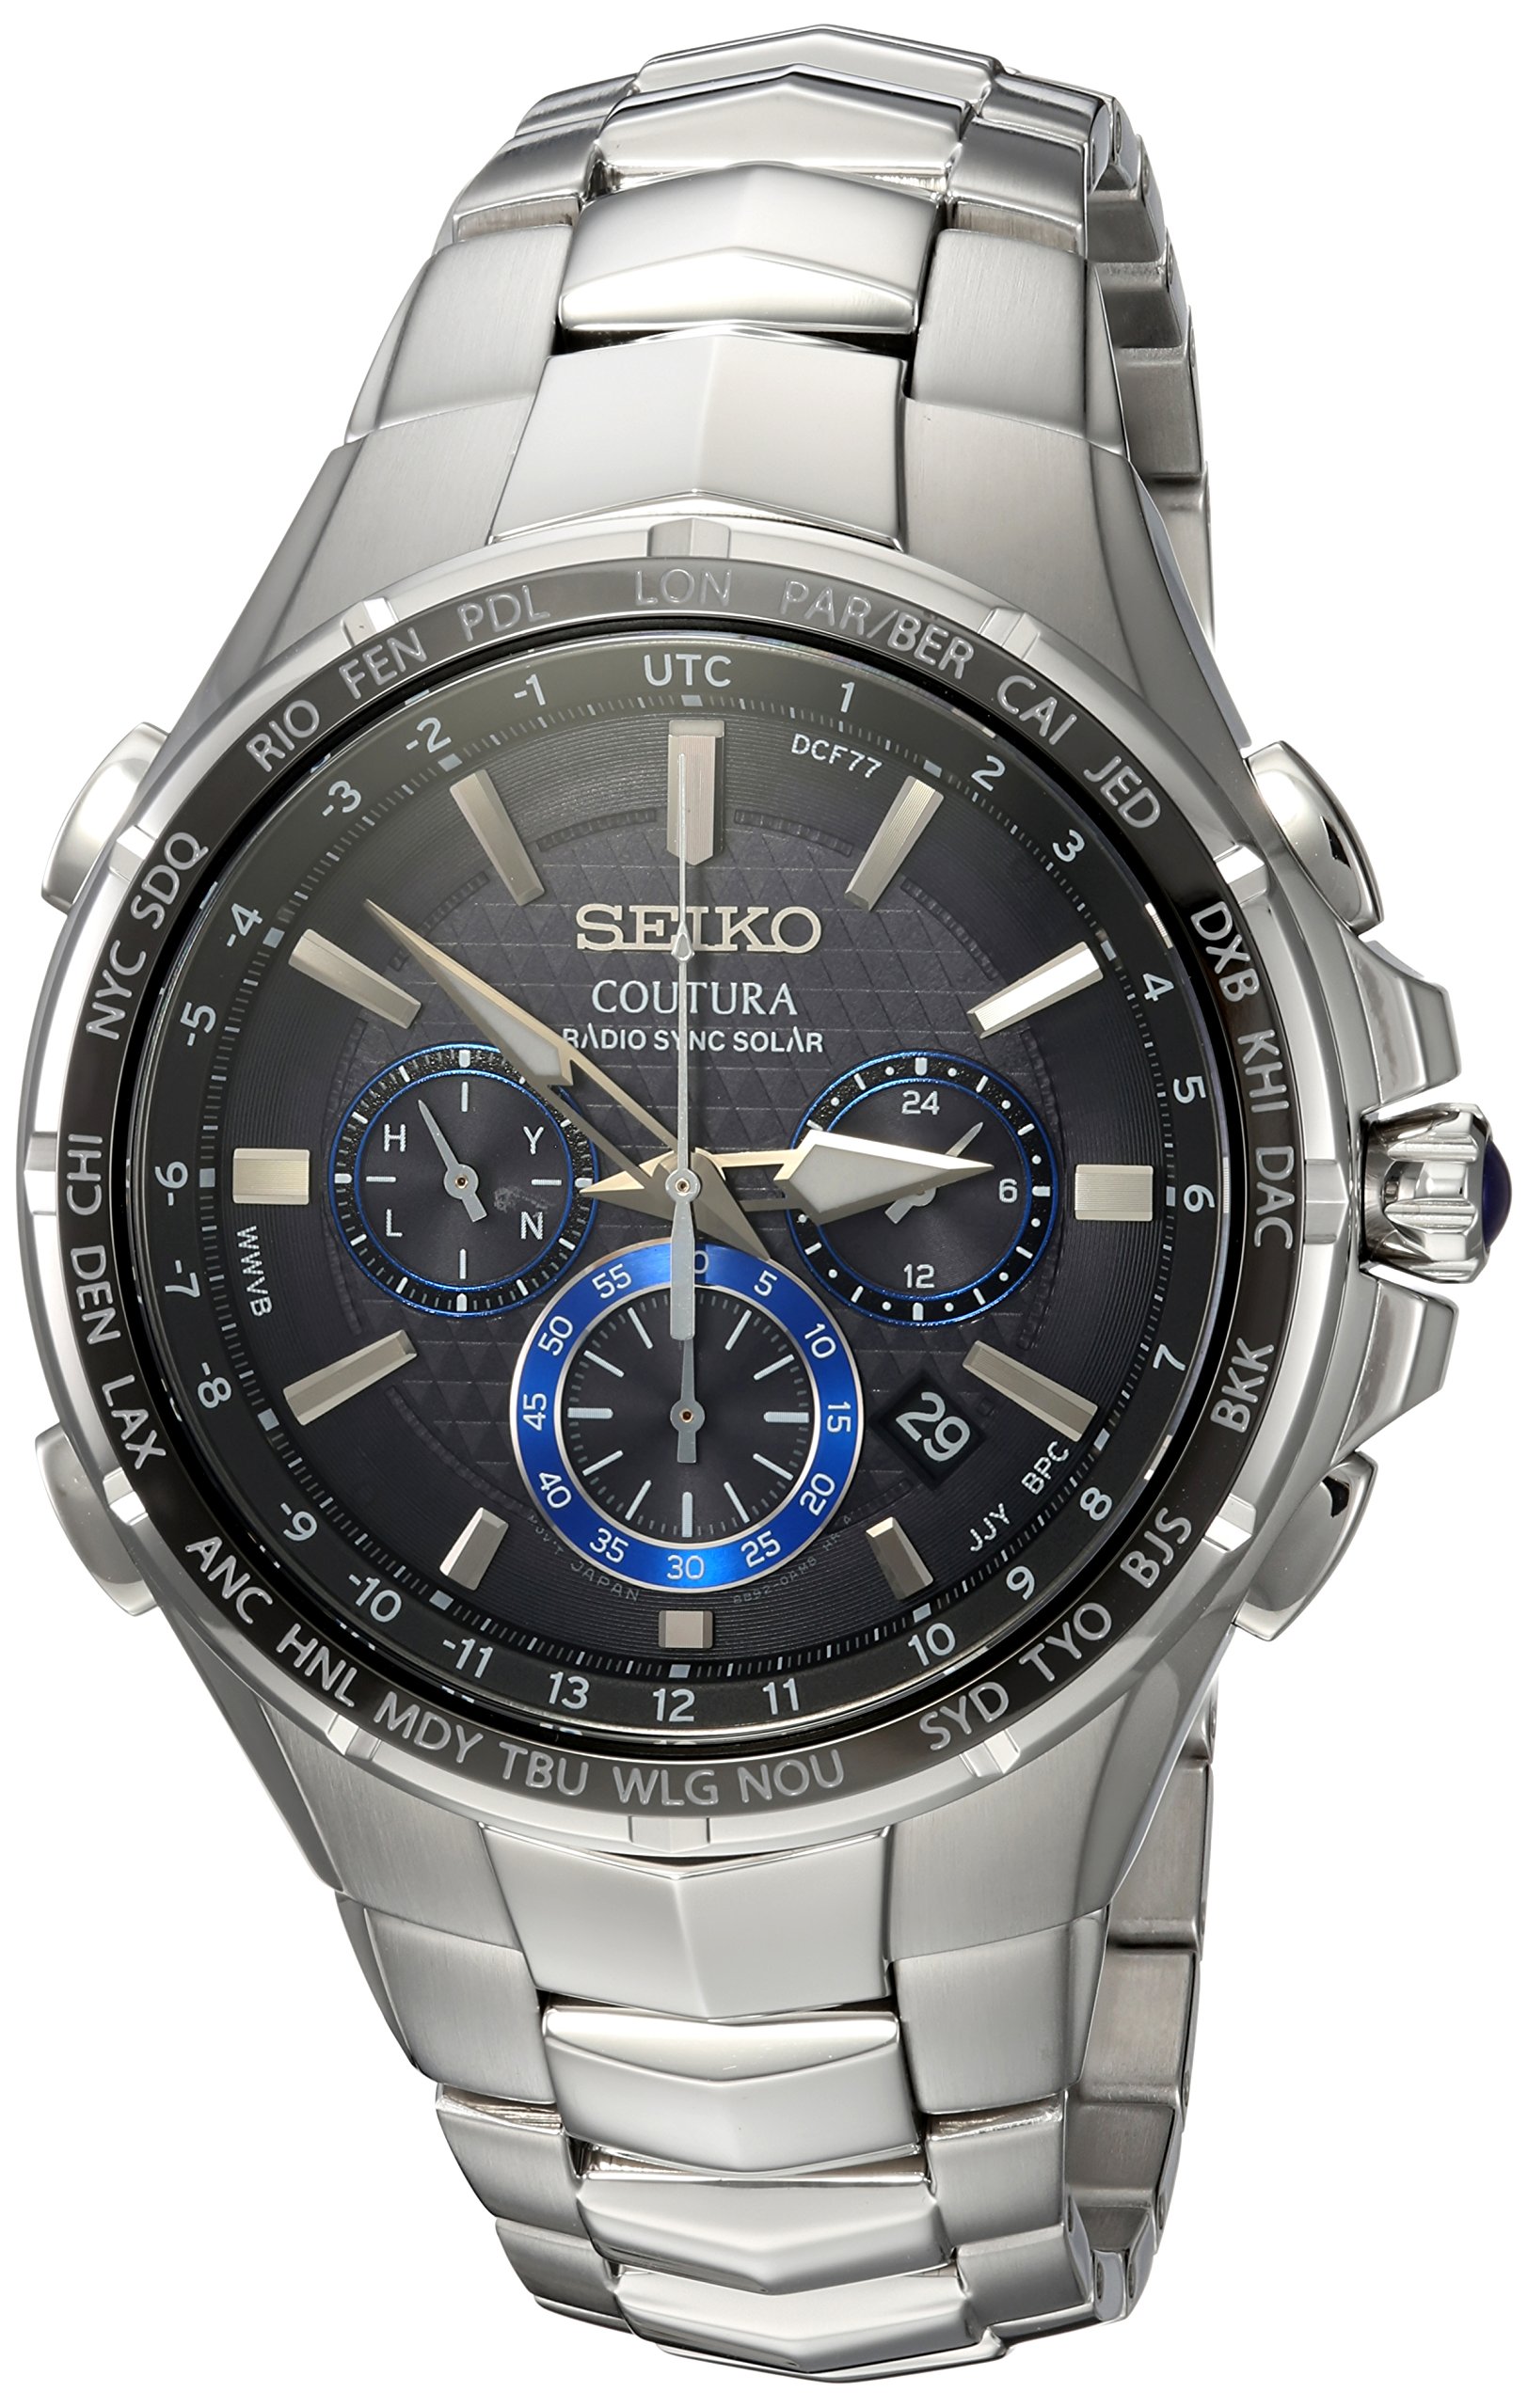 Seiko Men's COUTURA Stainless Steel Japanese-Quartz Watch with Stainless-Steel Strap, Silver, 26.3 (Model: SSG009) - $285(Regular $595)